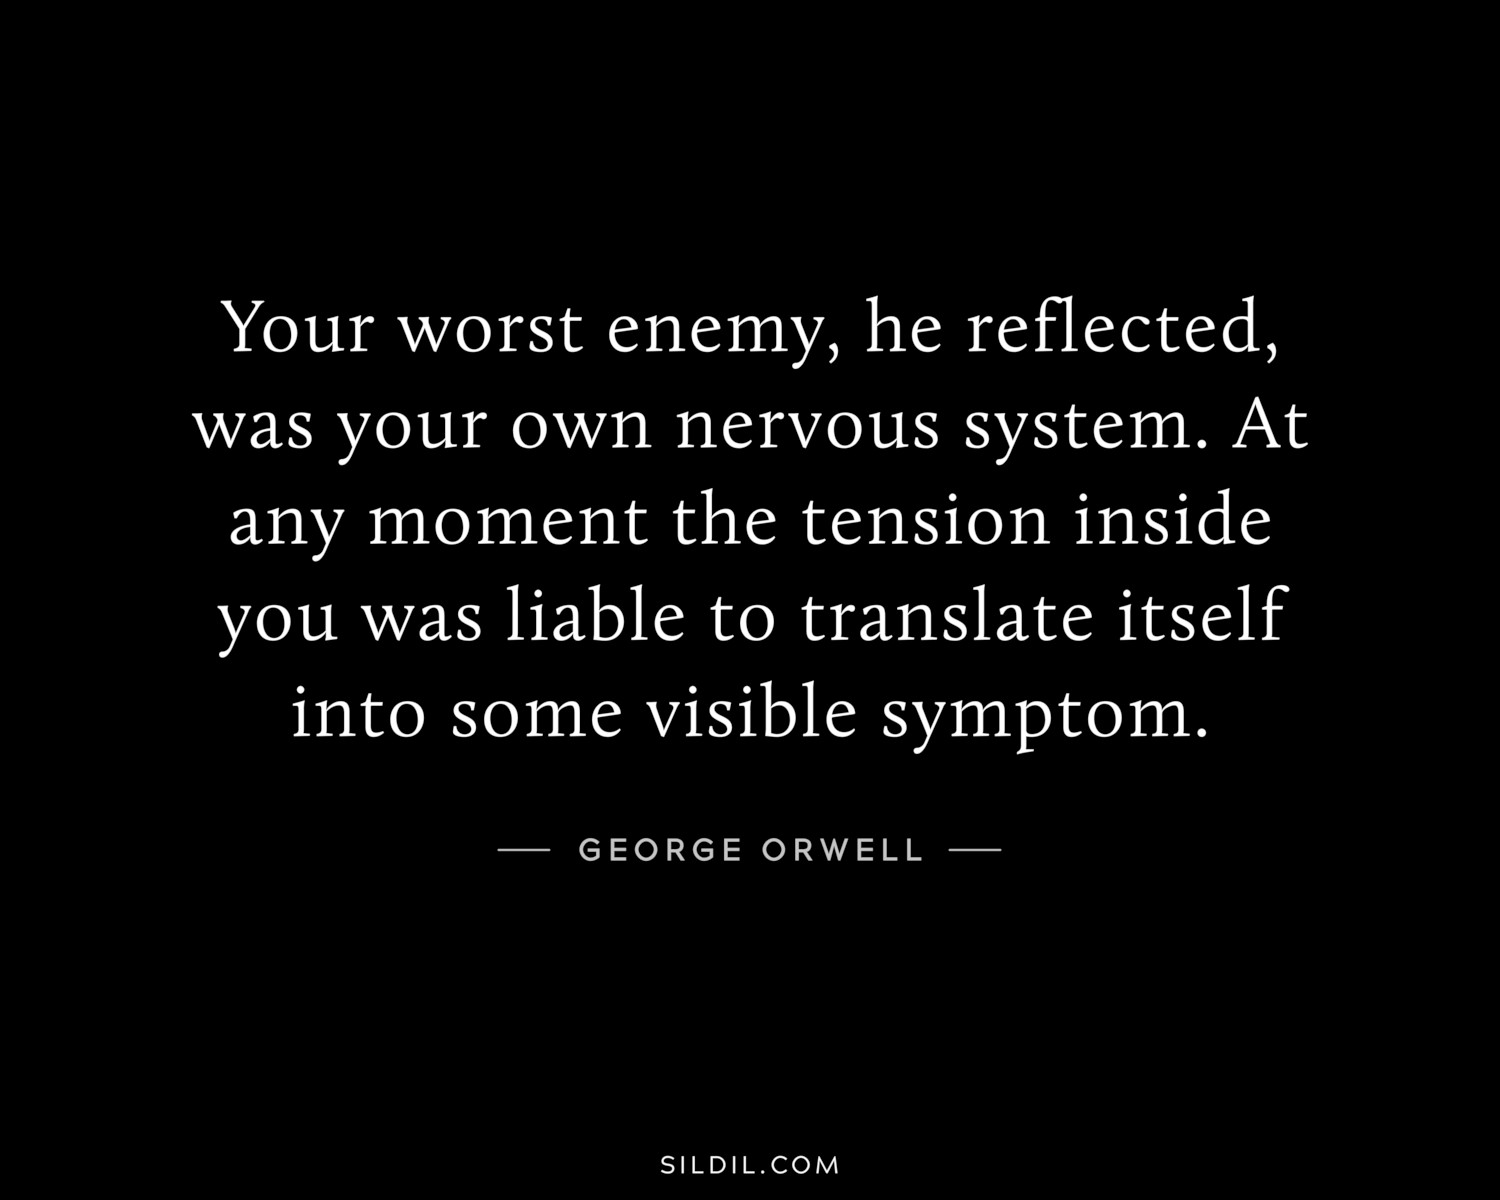 Your worst enemy, he reflected, was your own nervous system. At any moment the tension inside you was liable to translate itself into some visible symptom.